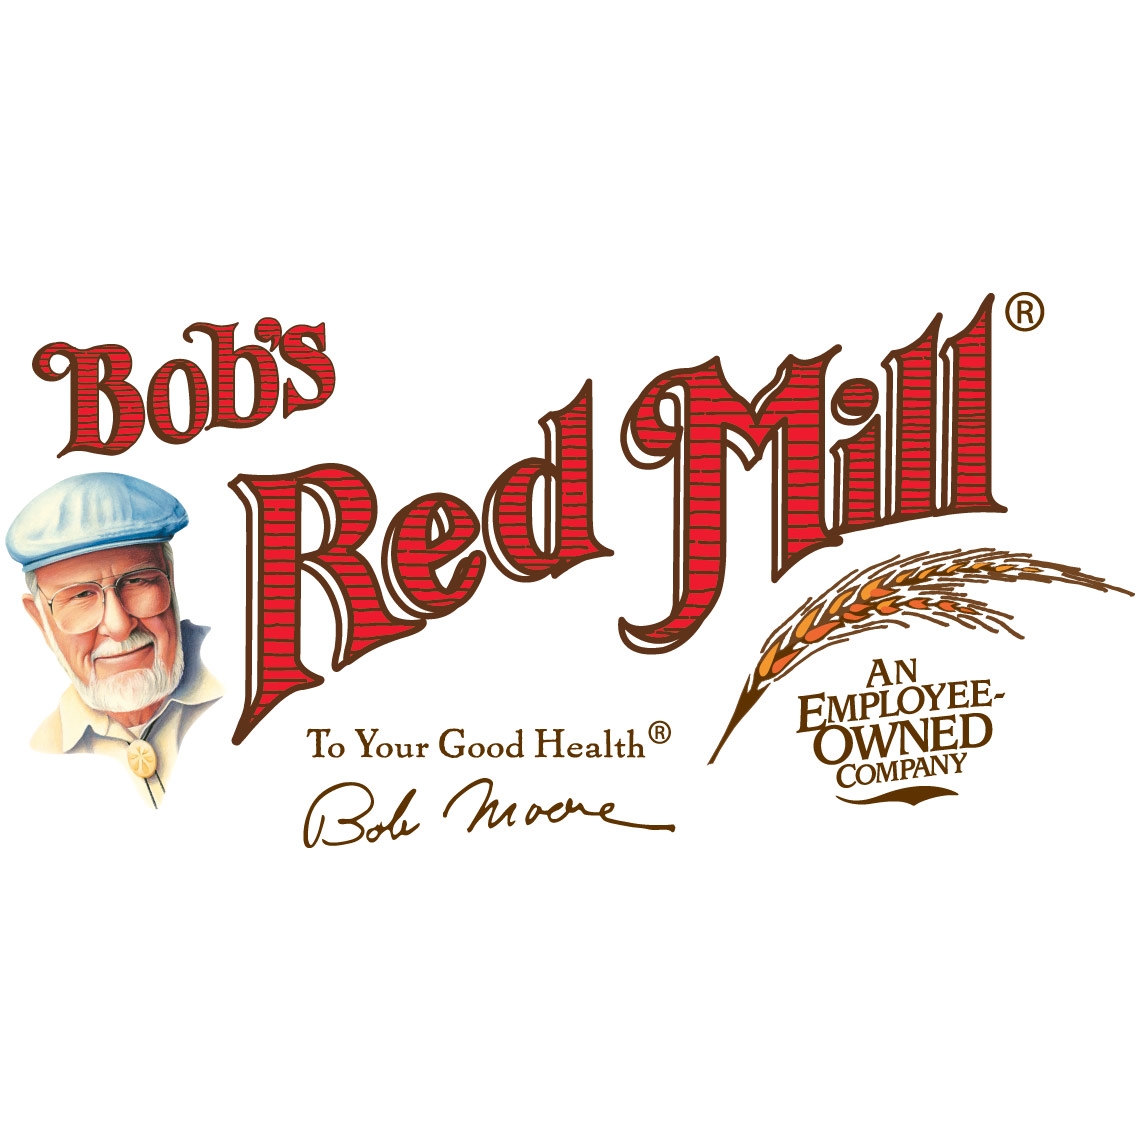 Chia Seeds - Buy Online Bob's Red Mill